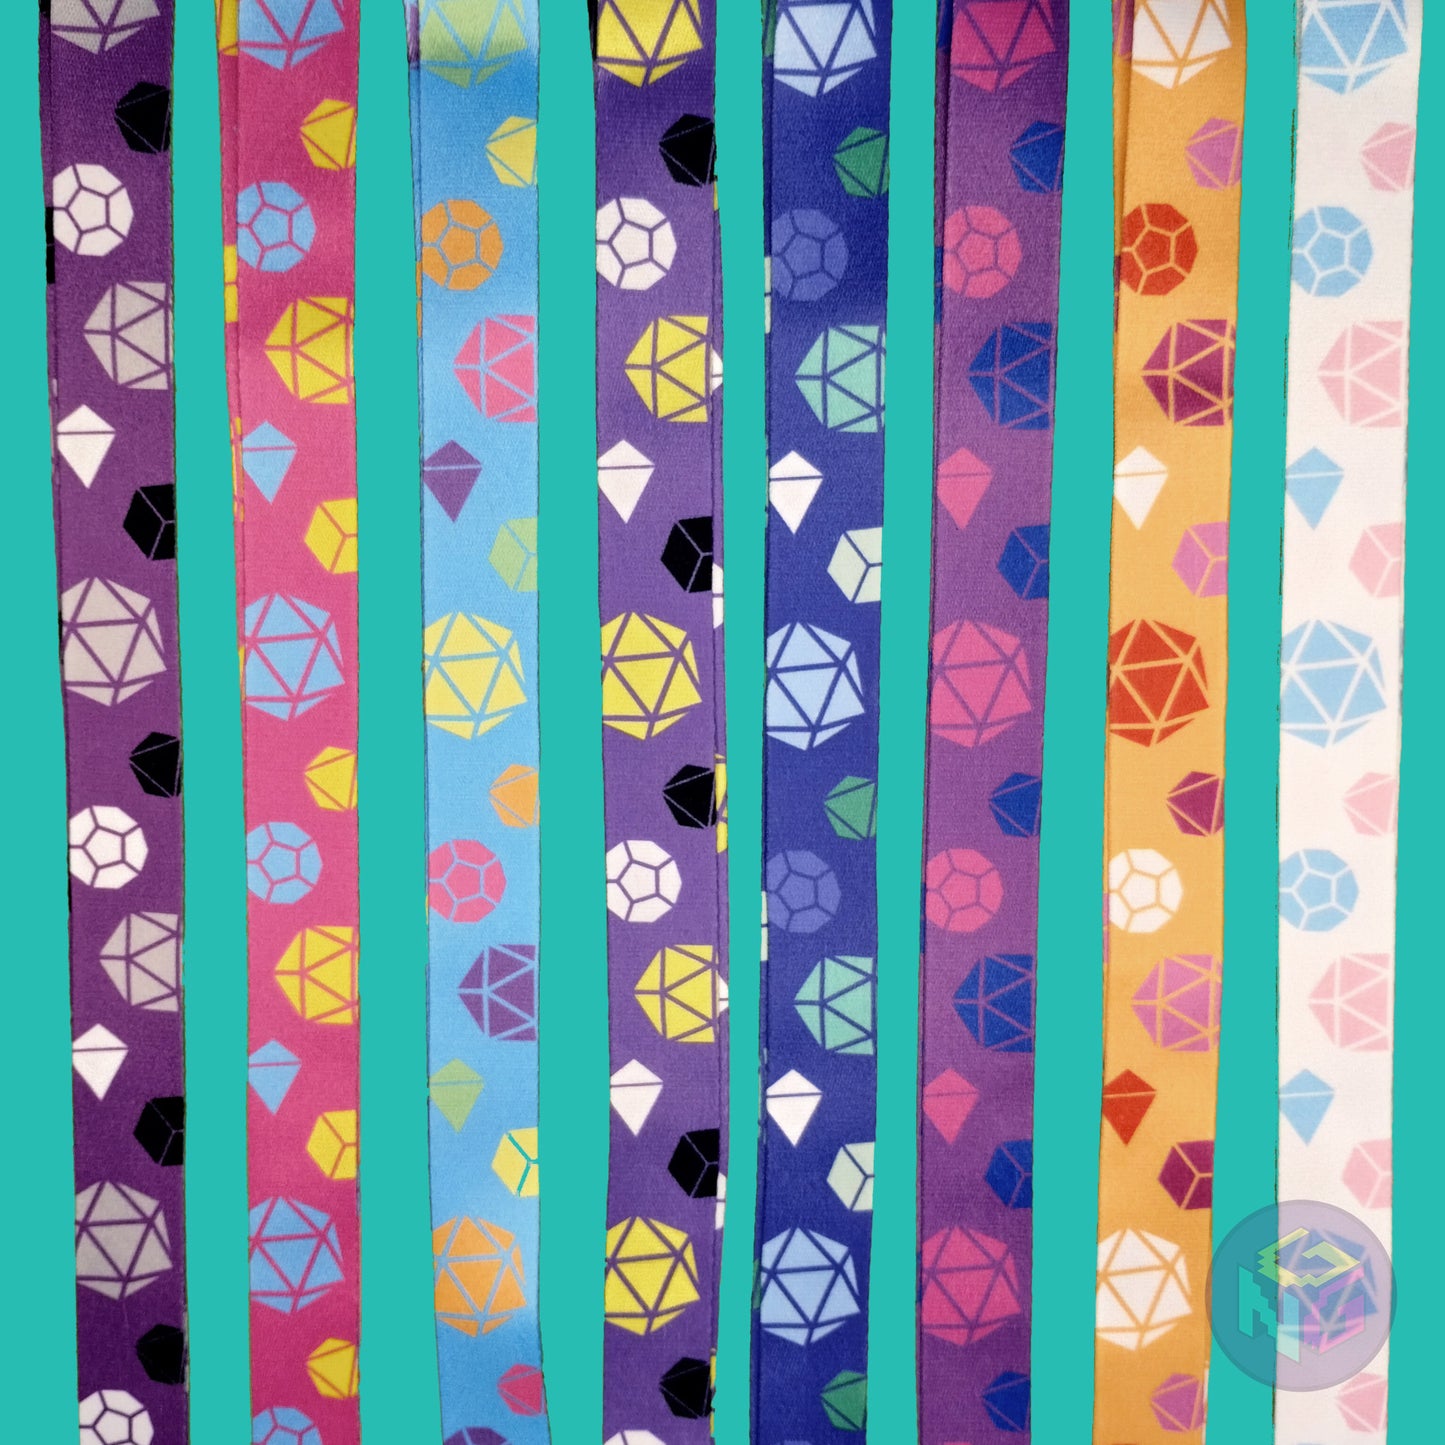 group shot of all eight of the pride dice lanyards showing the options for asexual, pansexual, rainbow, nonbinary, gay, bisexual, lesbian, and transgender